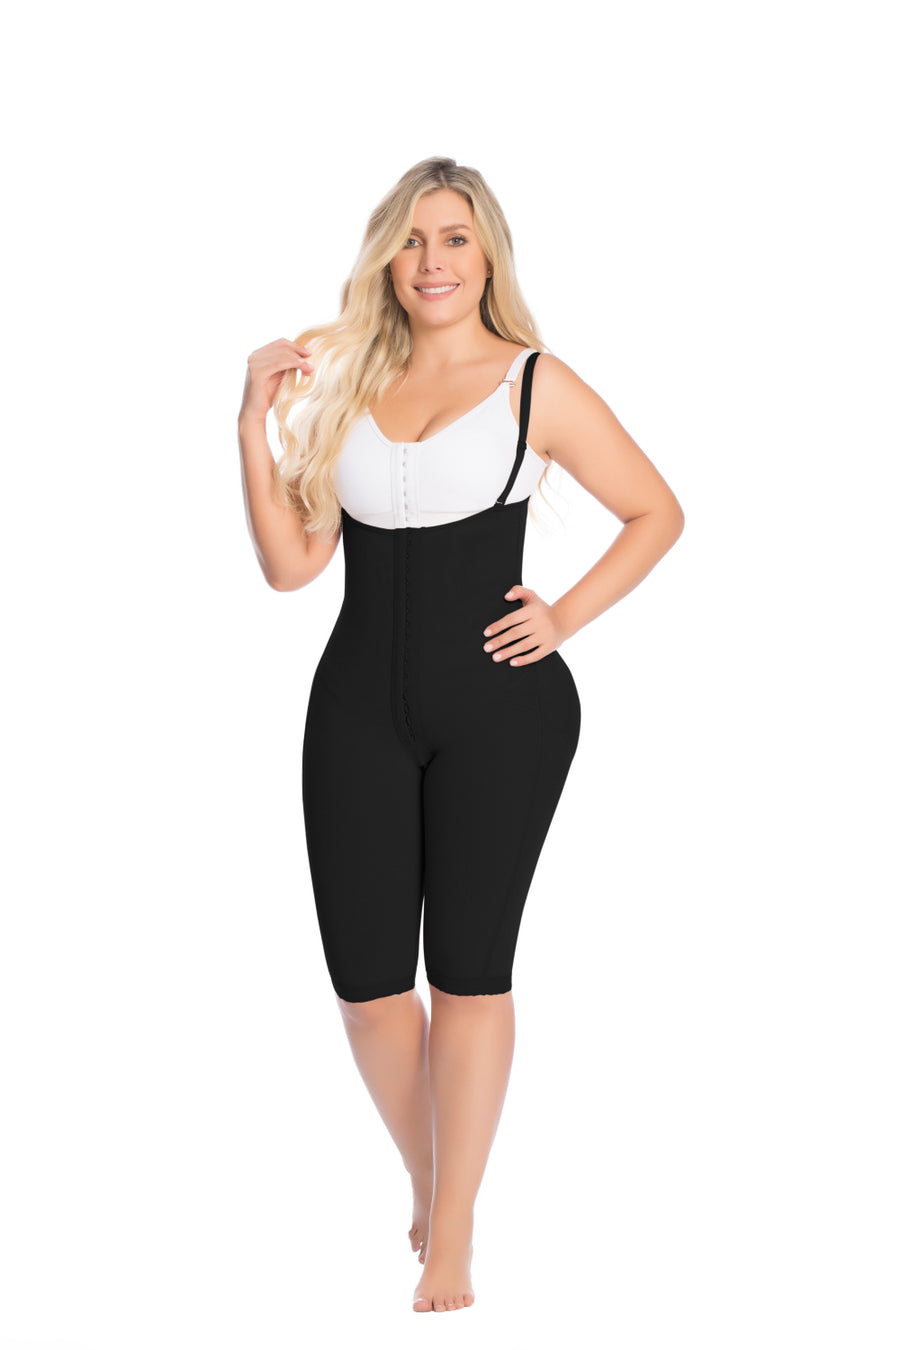 Gibbons Company - Innovative new shapewear designed to fit